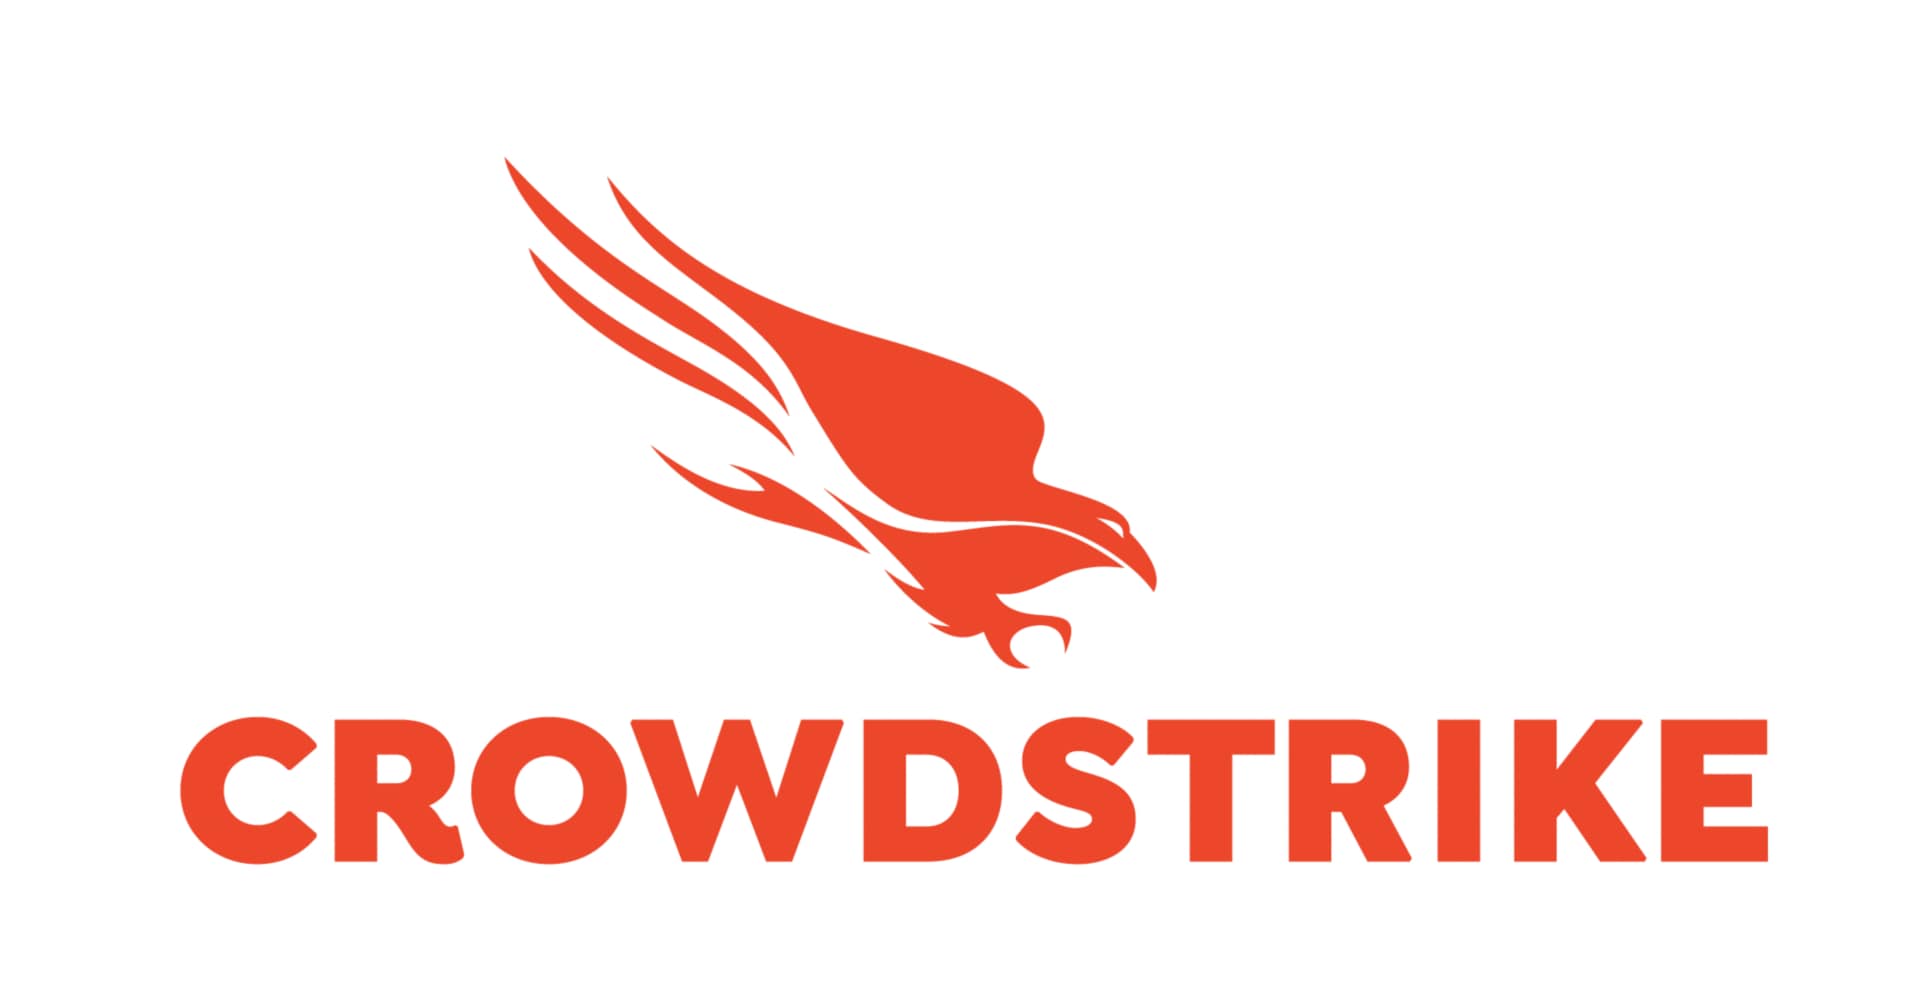 CrowdStrike 24-Month Overwatch Cloud Threat Hunting - On Demand